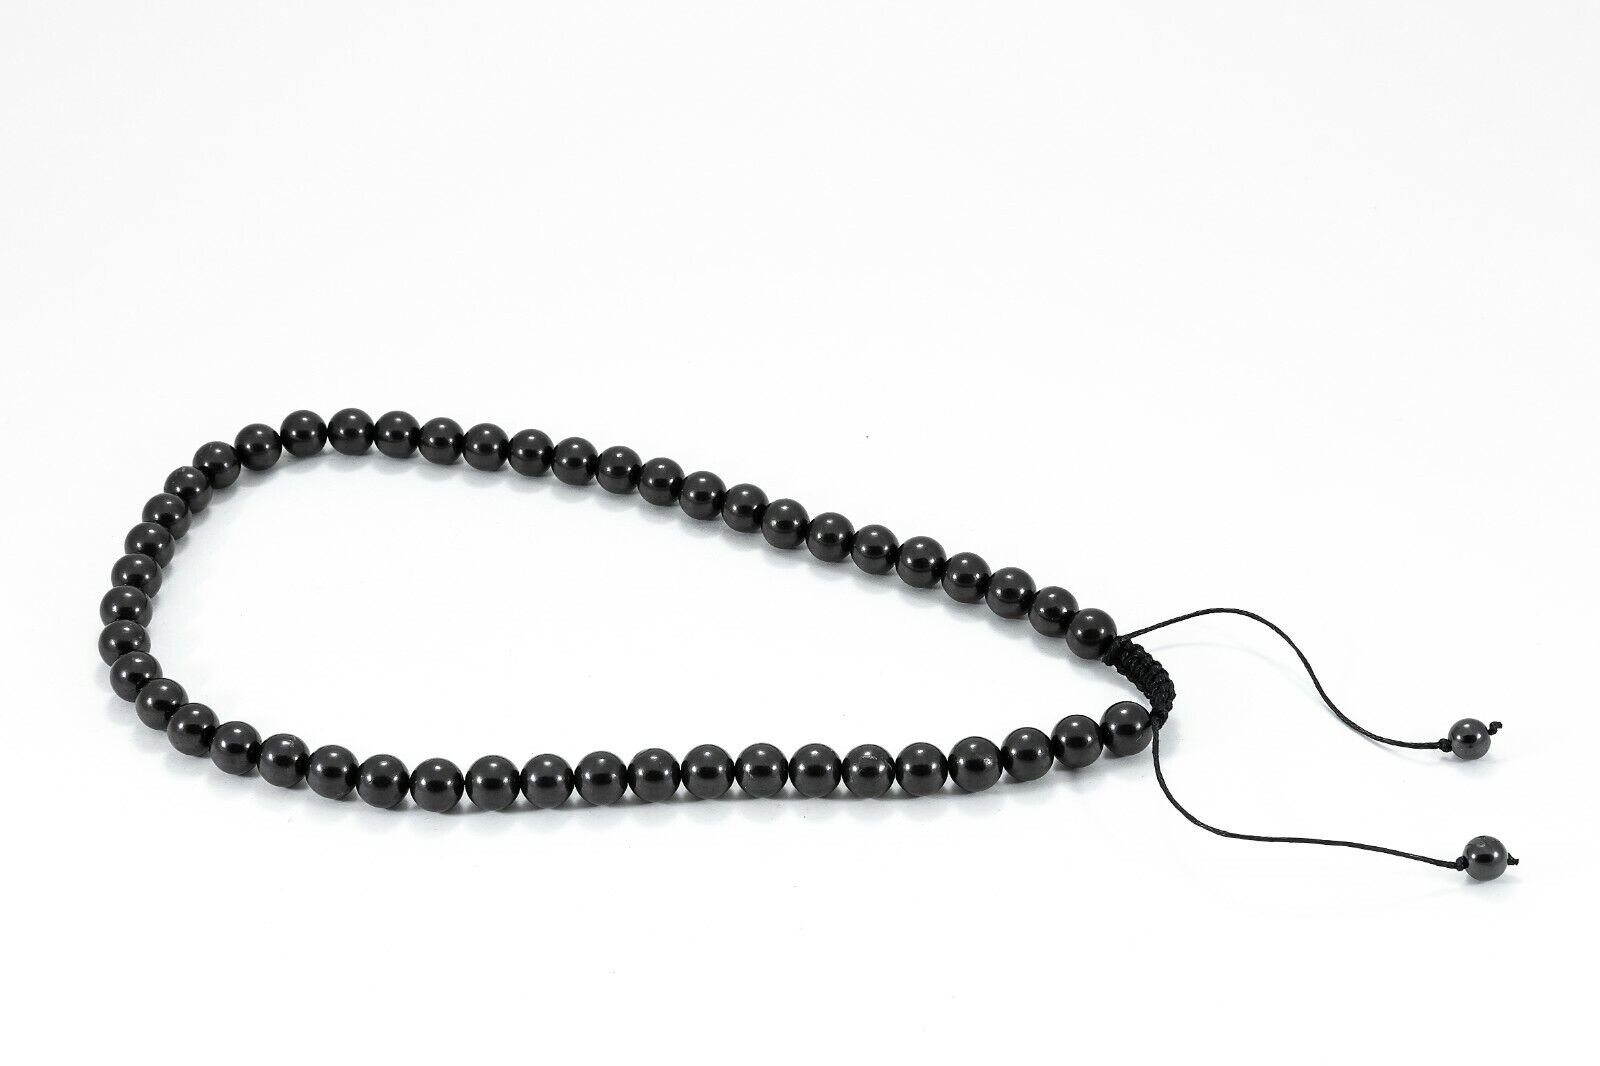 Shungite Necklace Black pearl beads 10 mm rare mineral EMF protection